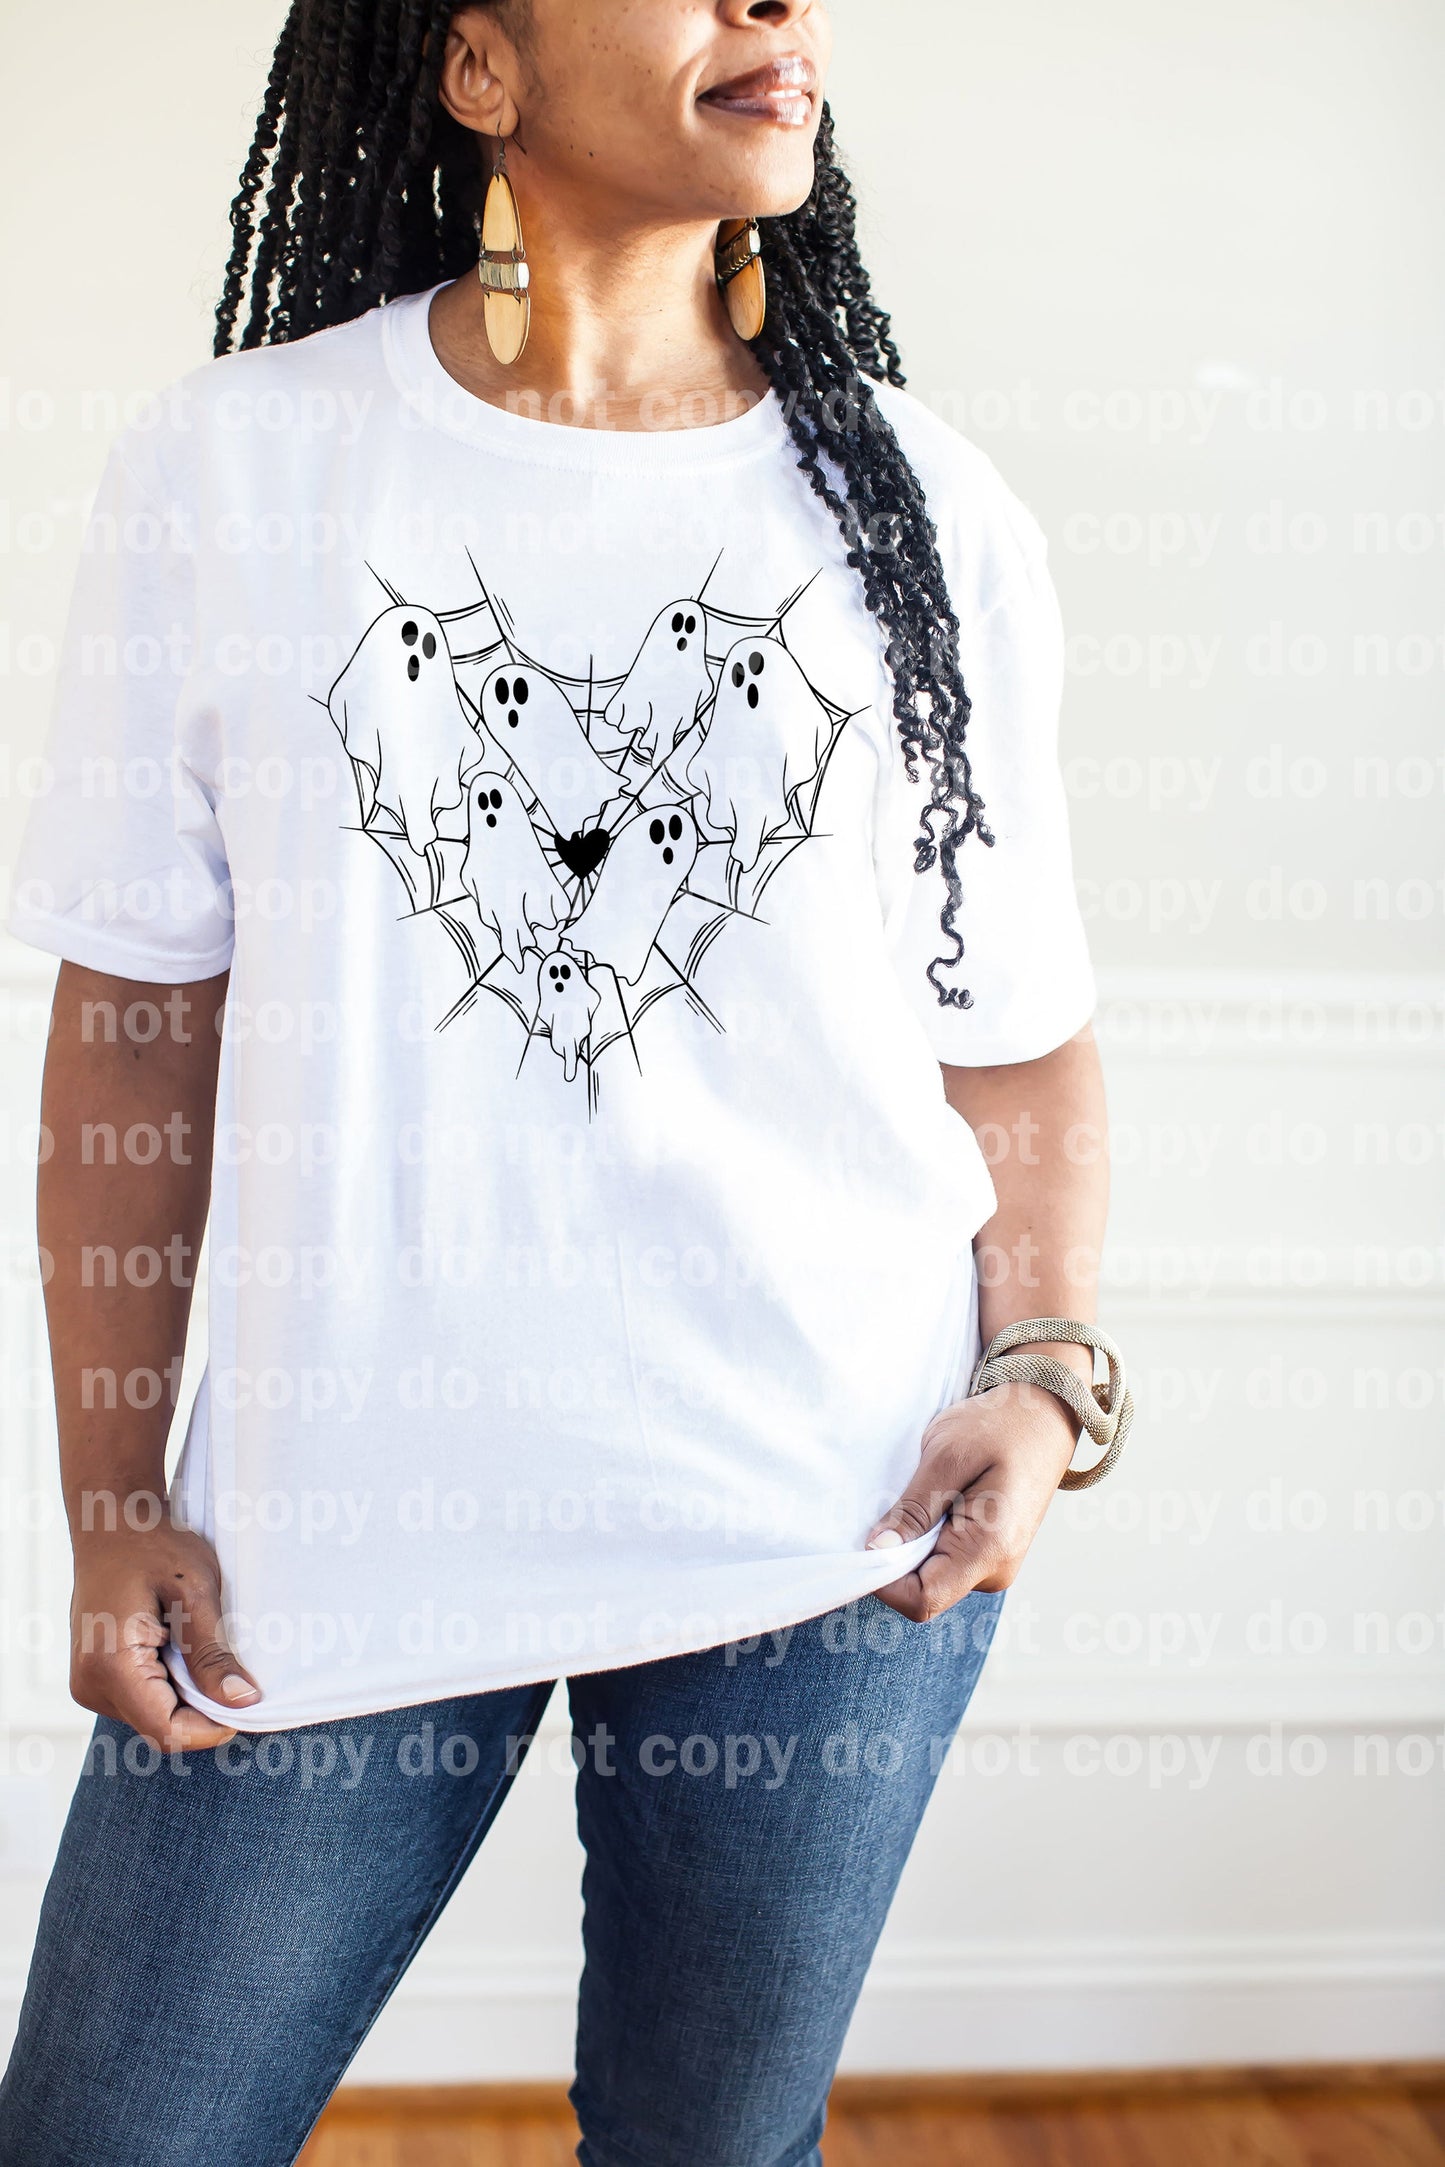 Heart Ghost Web Dream Print or Sublimation Print